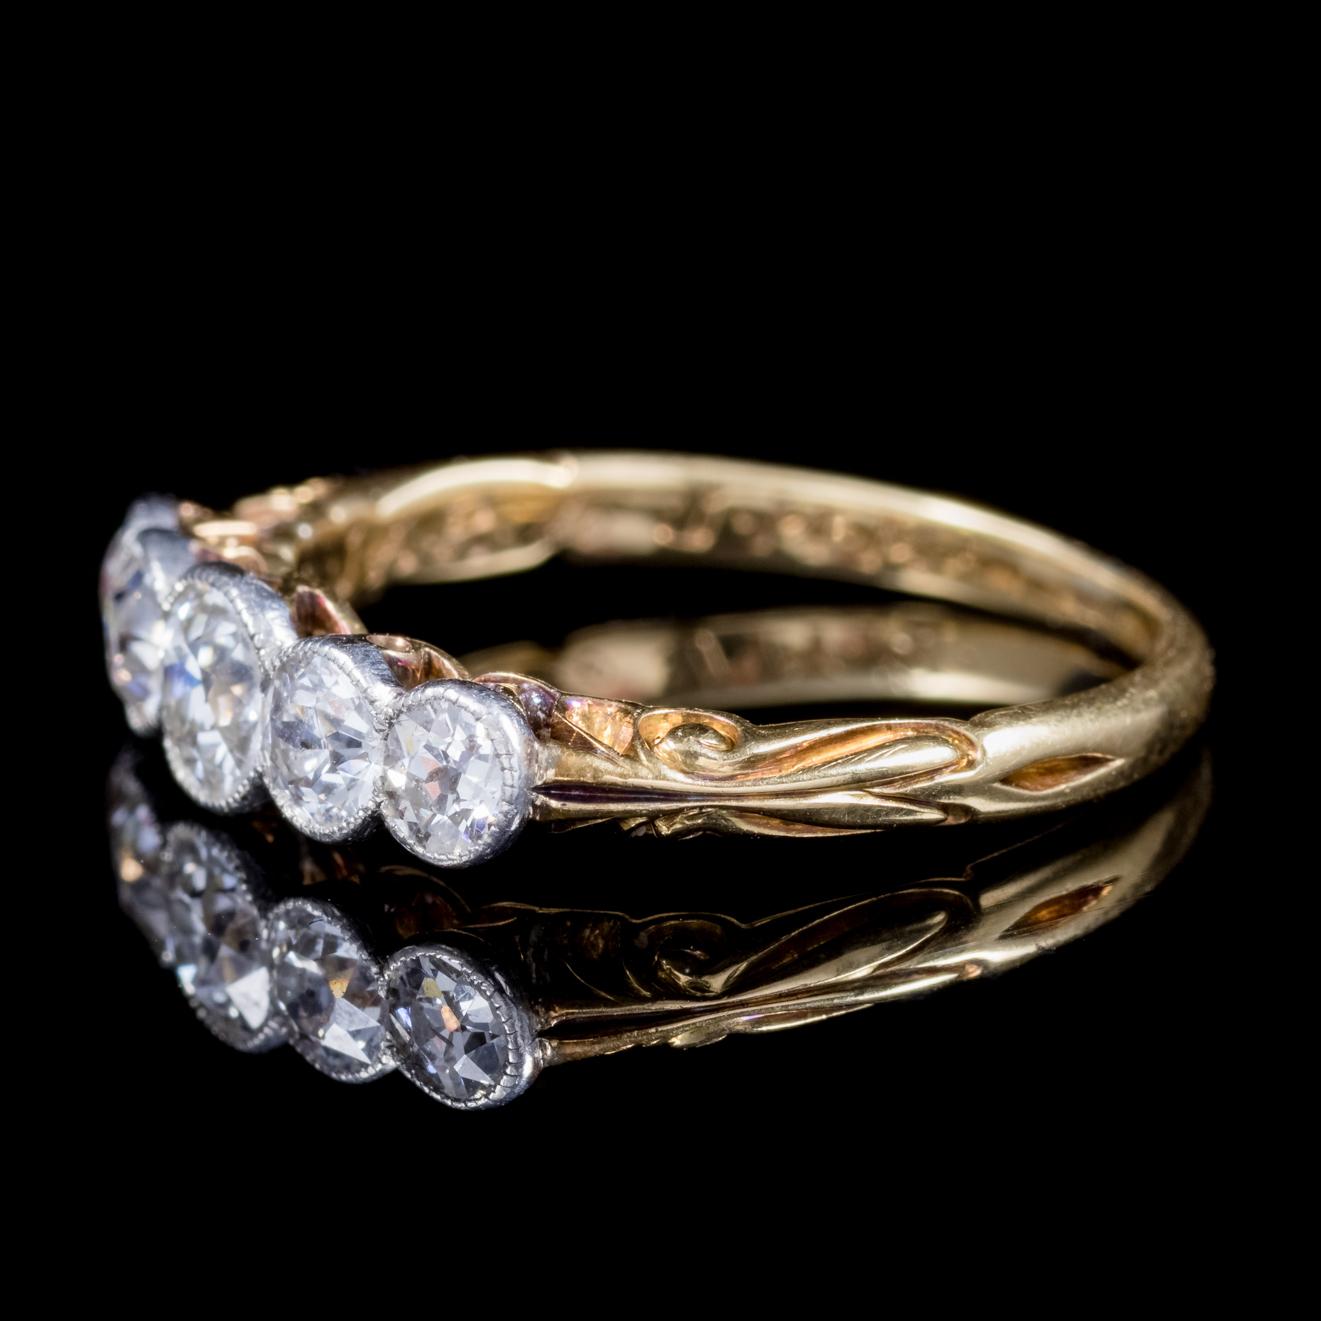 This stunning antique Edwardian ring is adorned with five beautiful SI 1 clarity - H Colour Diamonds the largest of which is 0.40ct in the centre graduating out with approx.1ct in total. 

Diamonds sparkle continuously and beautifully captivating